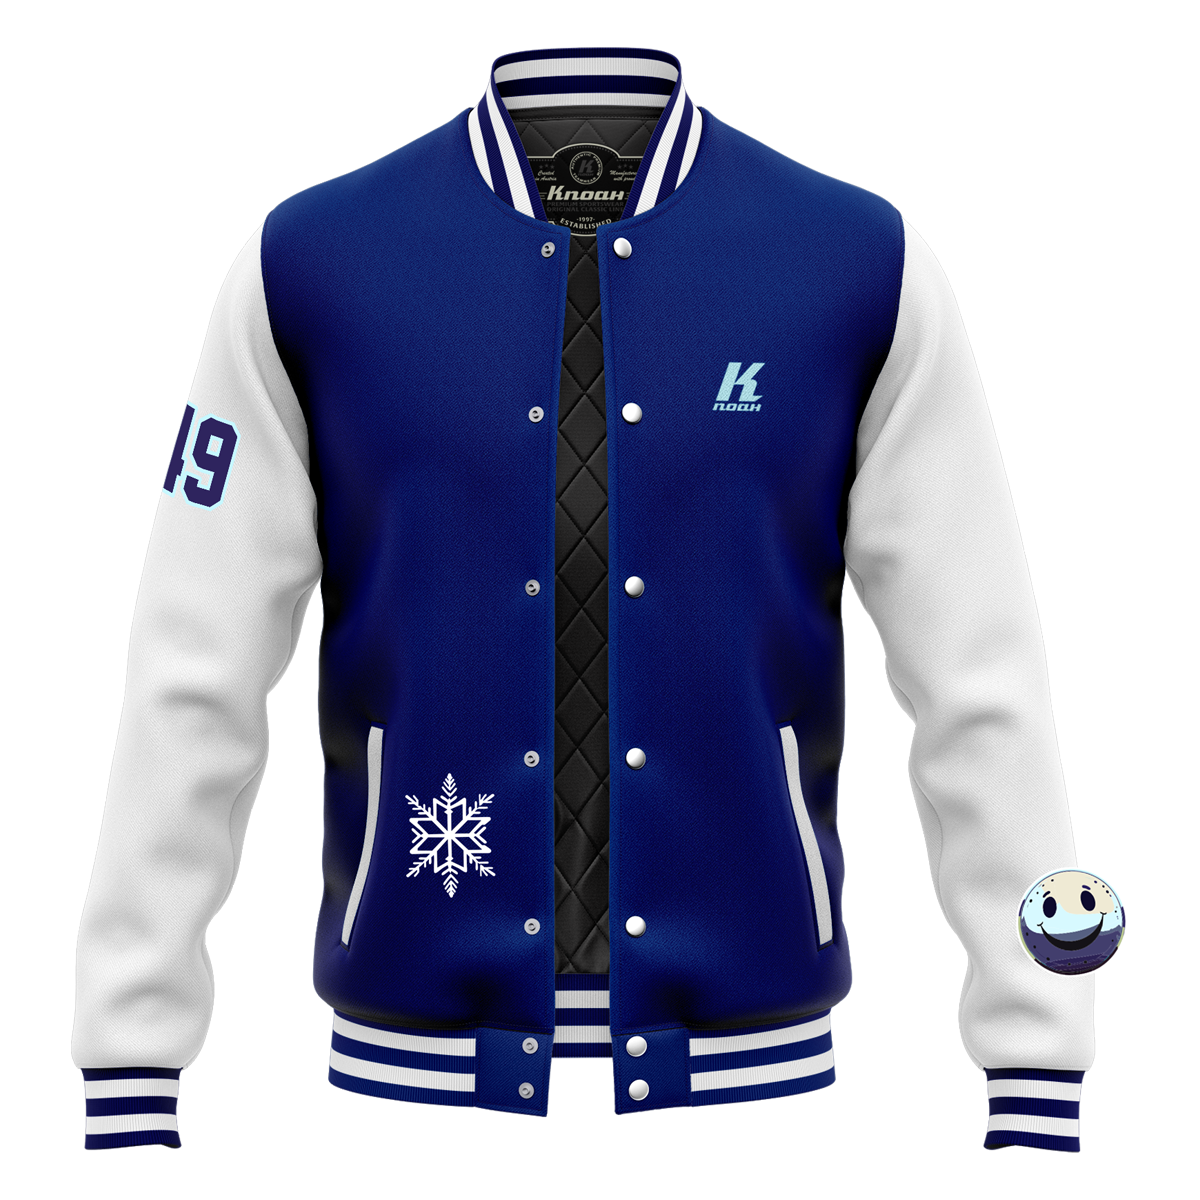 Day 7: "Icy Dreams" Authentic Varsity Jacket with Playernumber/Initials